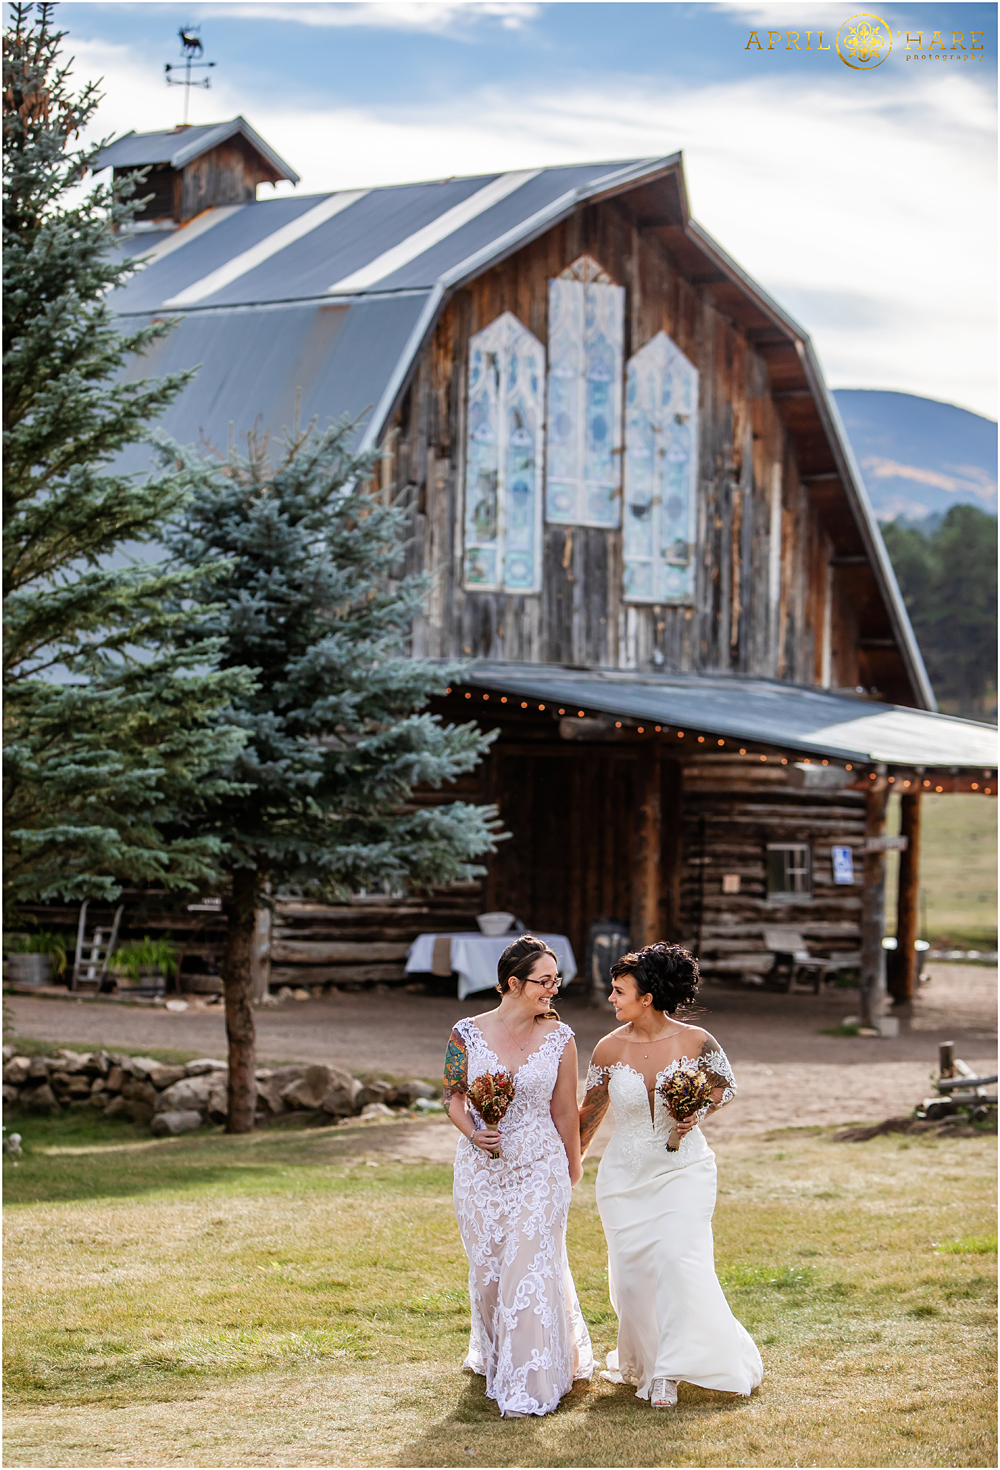 Gorgeous same sex wedding ceremony at The Barn at Evergreen Memorial Park in Colorado